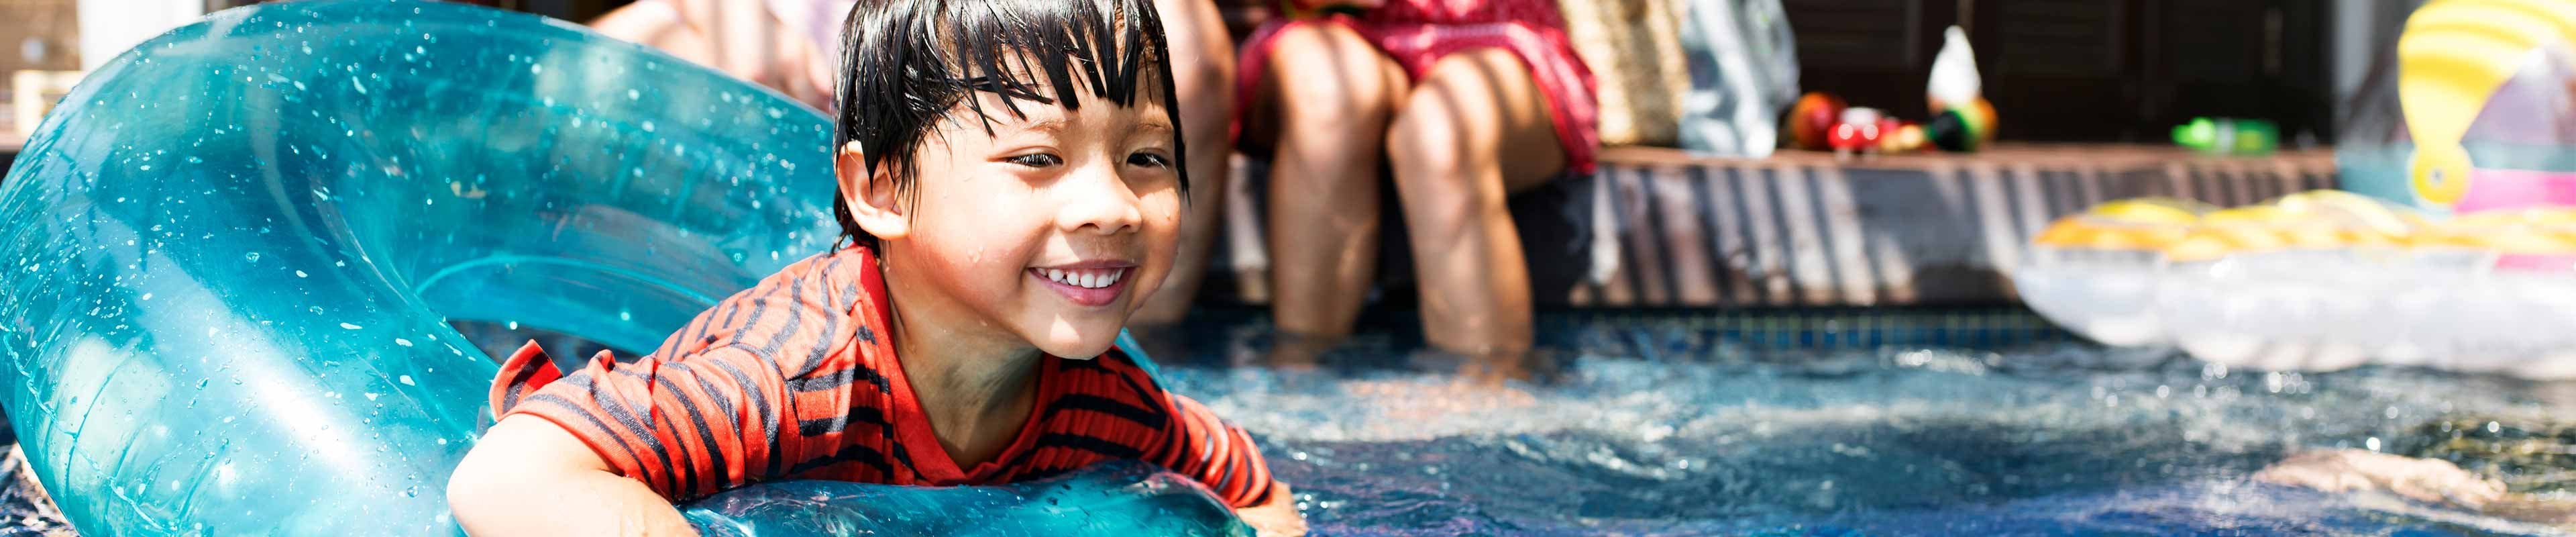 A smiling Southeast Asian boy in a red and black striped t-shirt swims in his family's pool using an inner tube to float while his mother and father sit on the edge of the pool watching him.